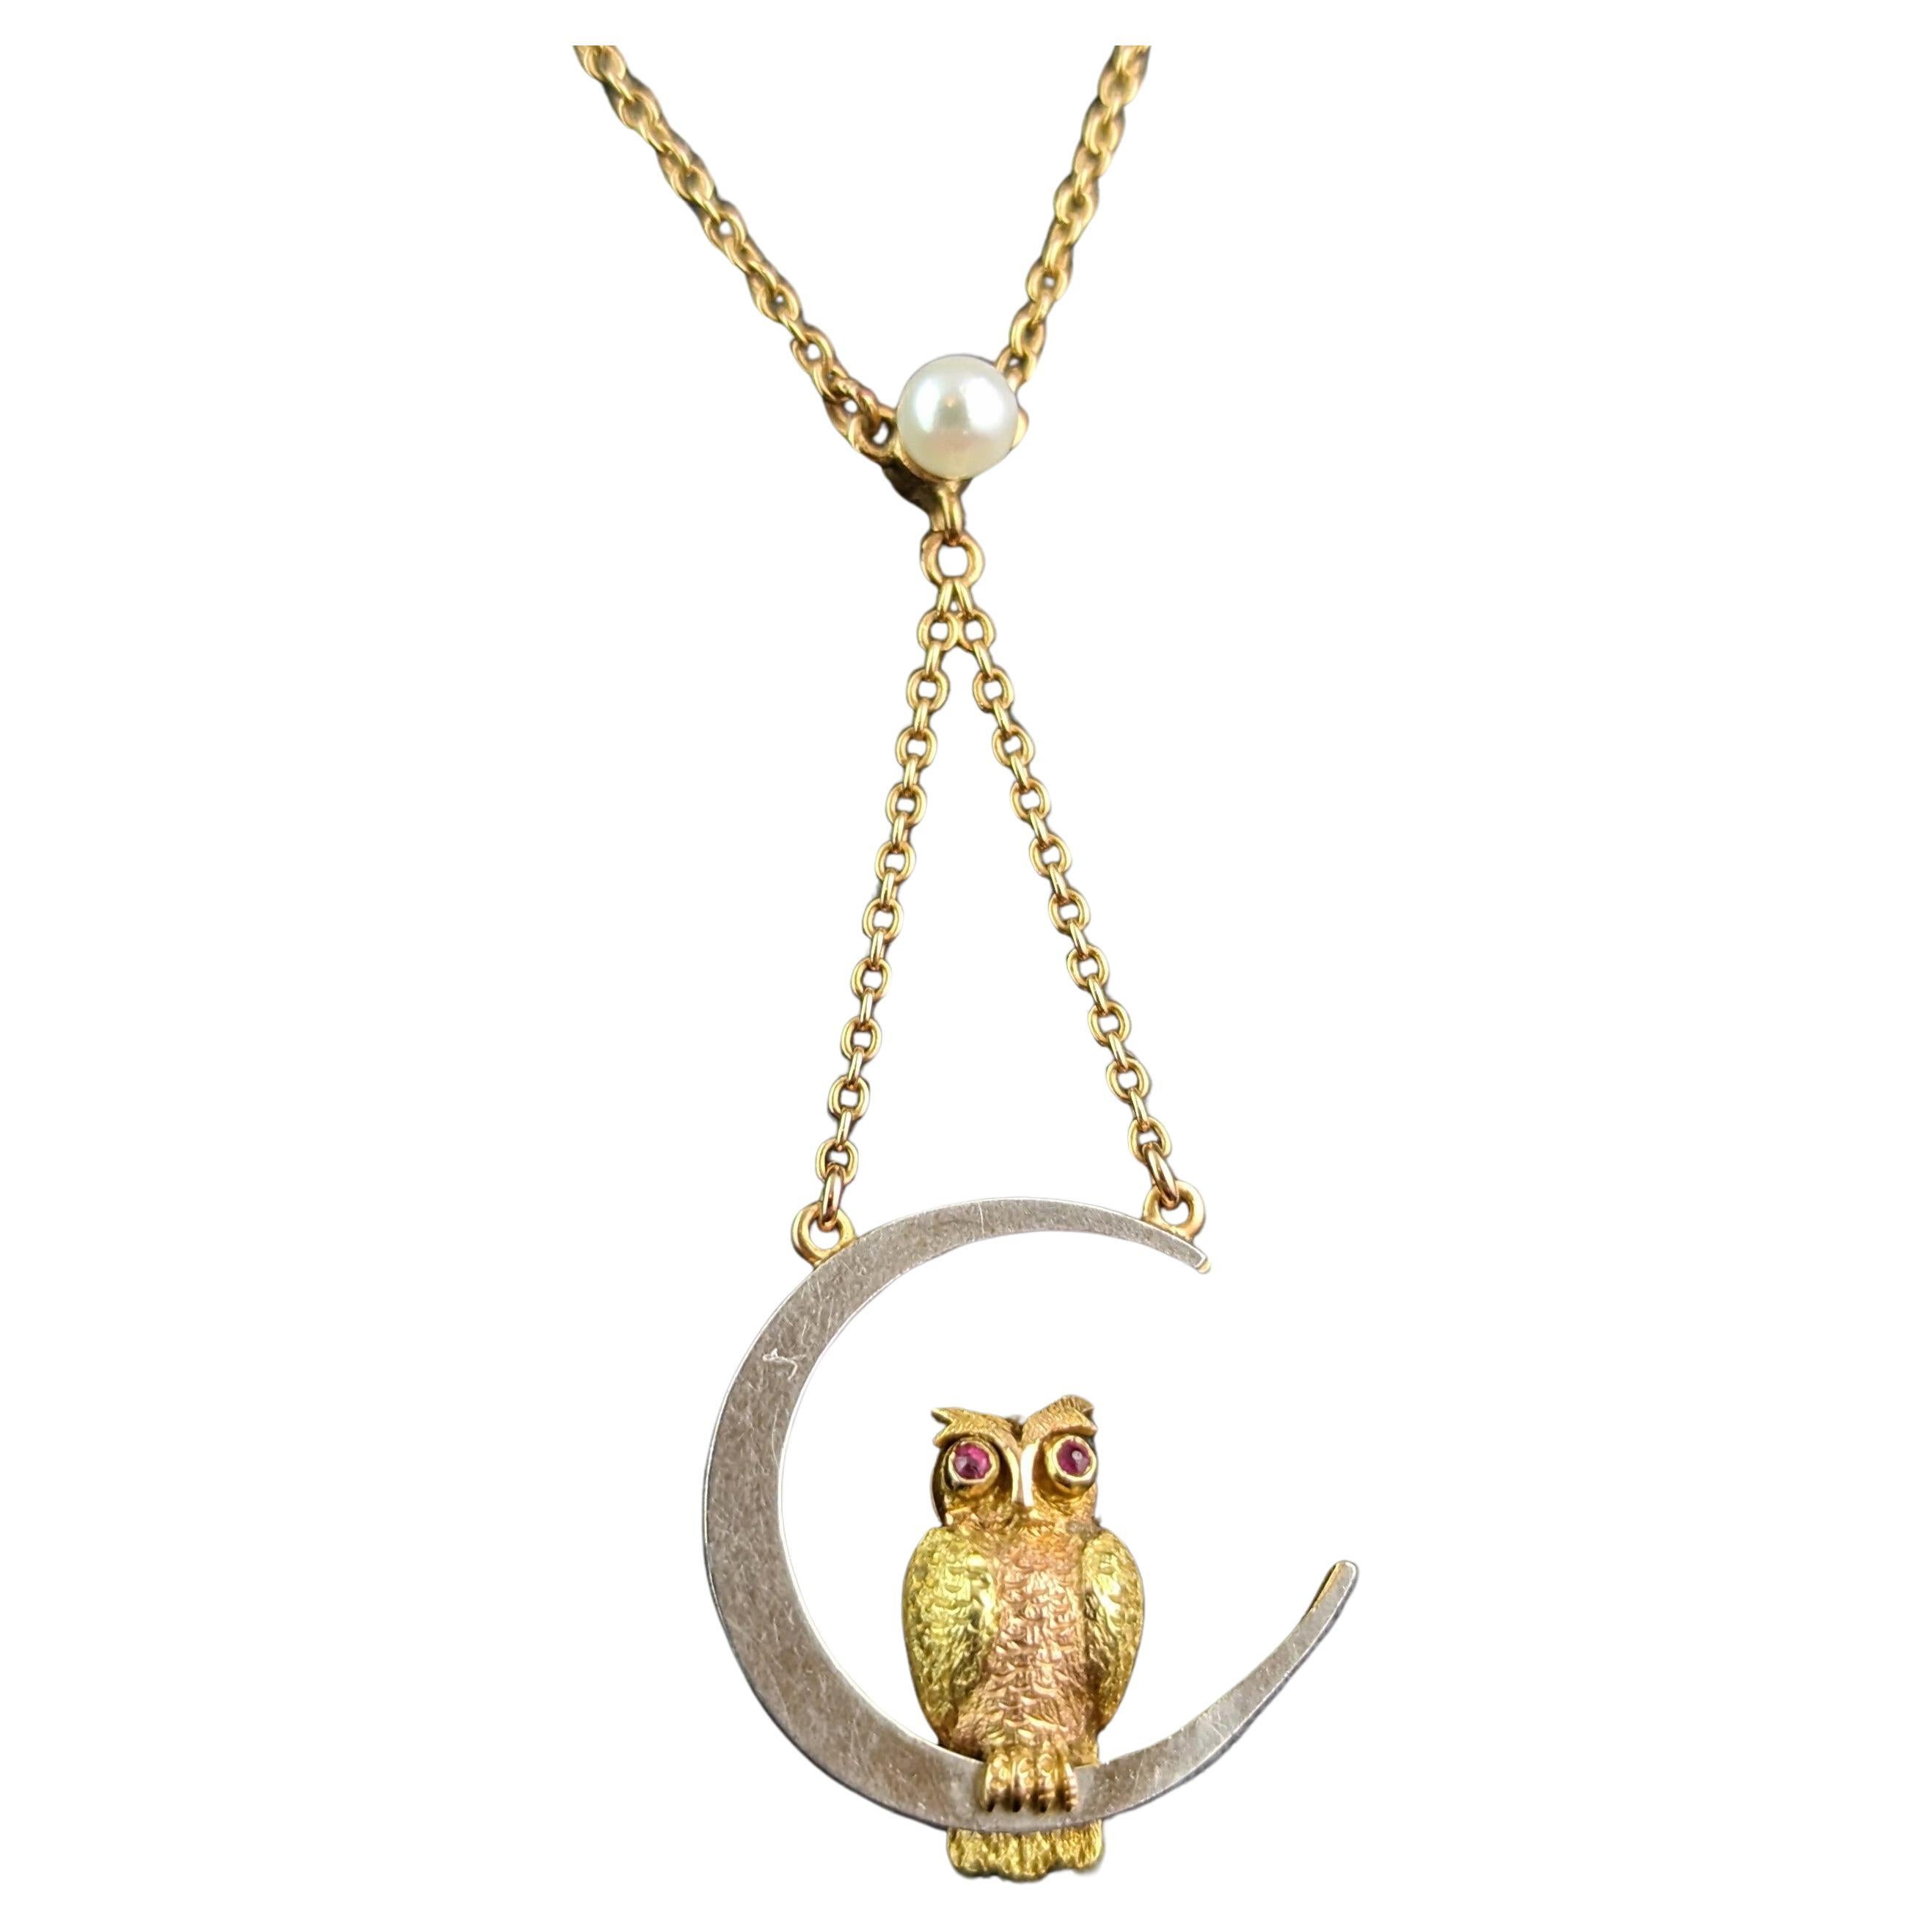 Antique Owl and Crescent moon pendant necklace, 15k gold and platinum, Ruby